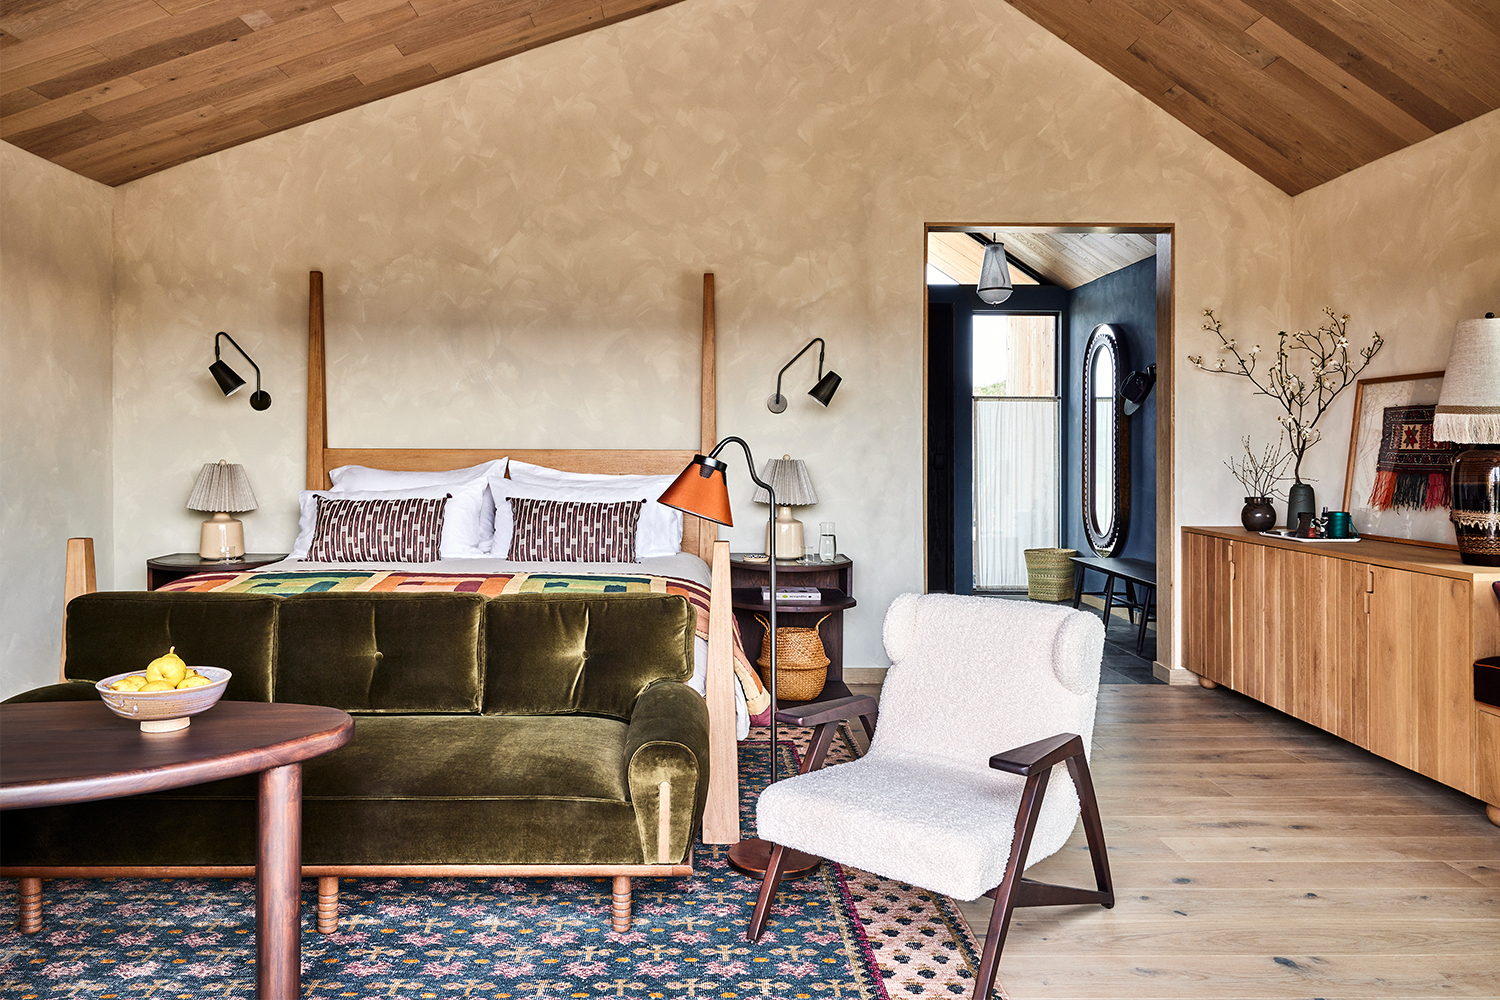 A room at Wildflower Farms, a new Auberge Resorts Collection hotel in the Hudson Valley in New York